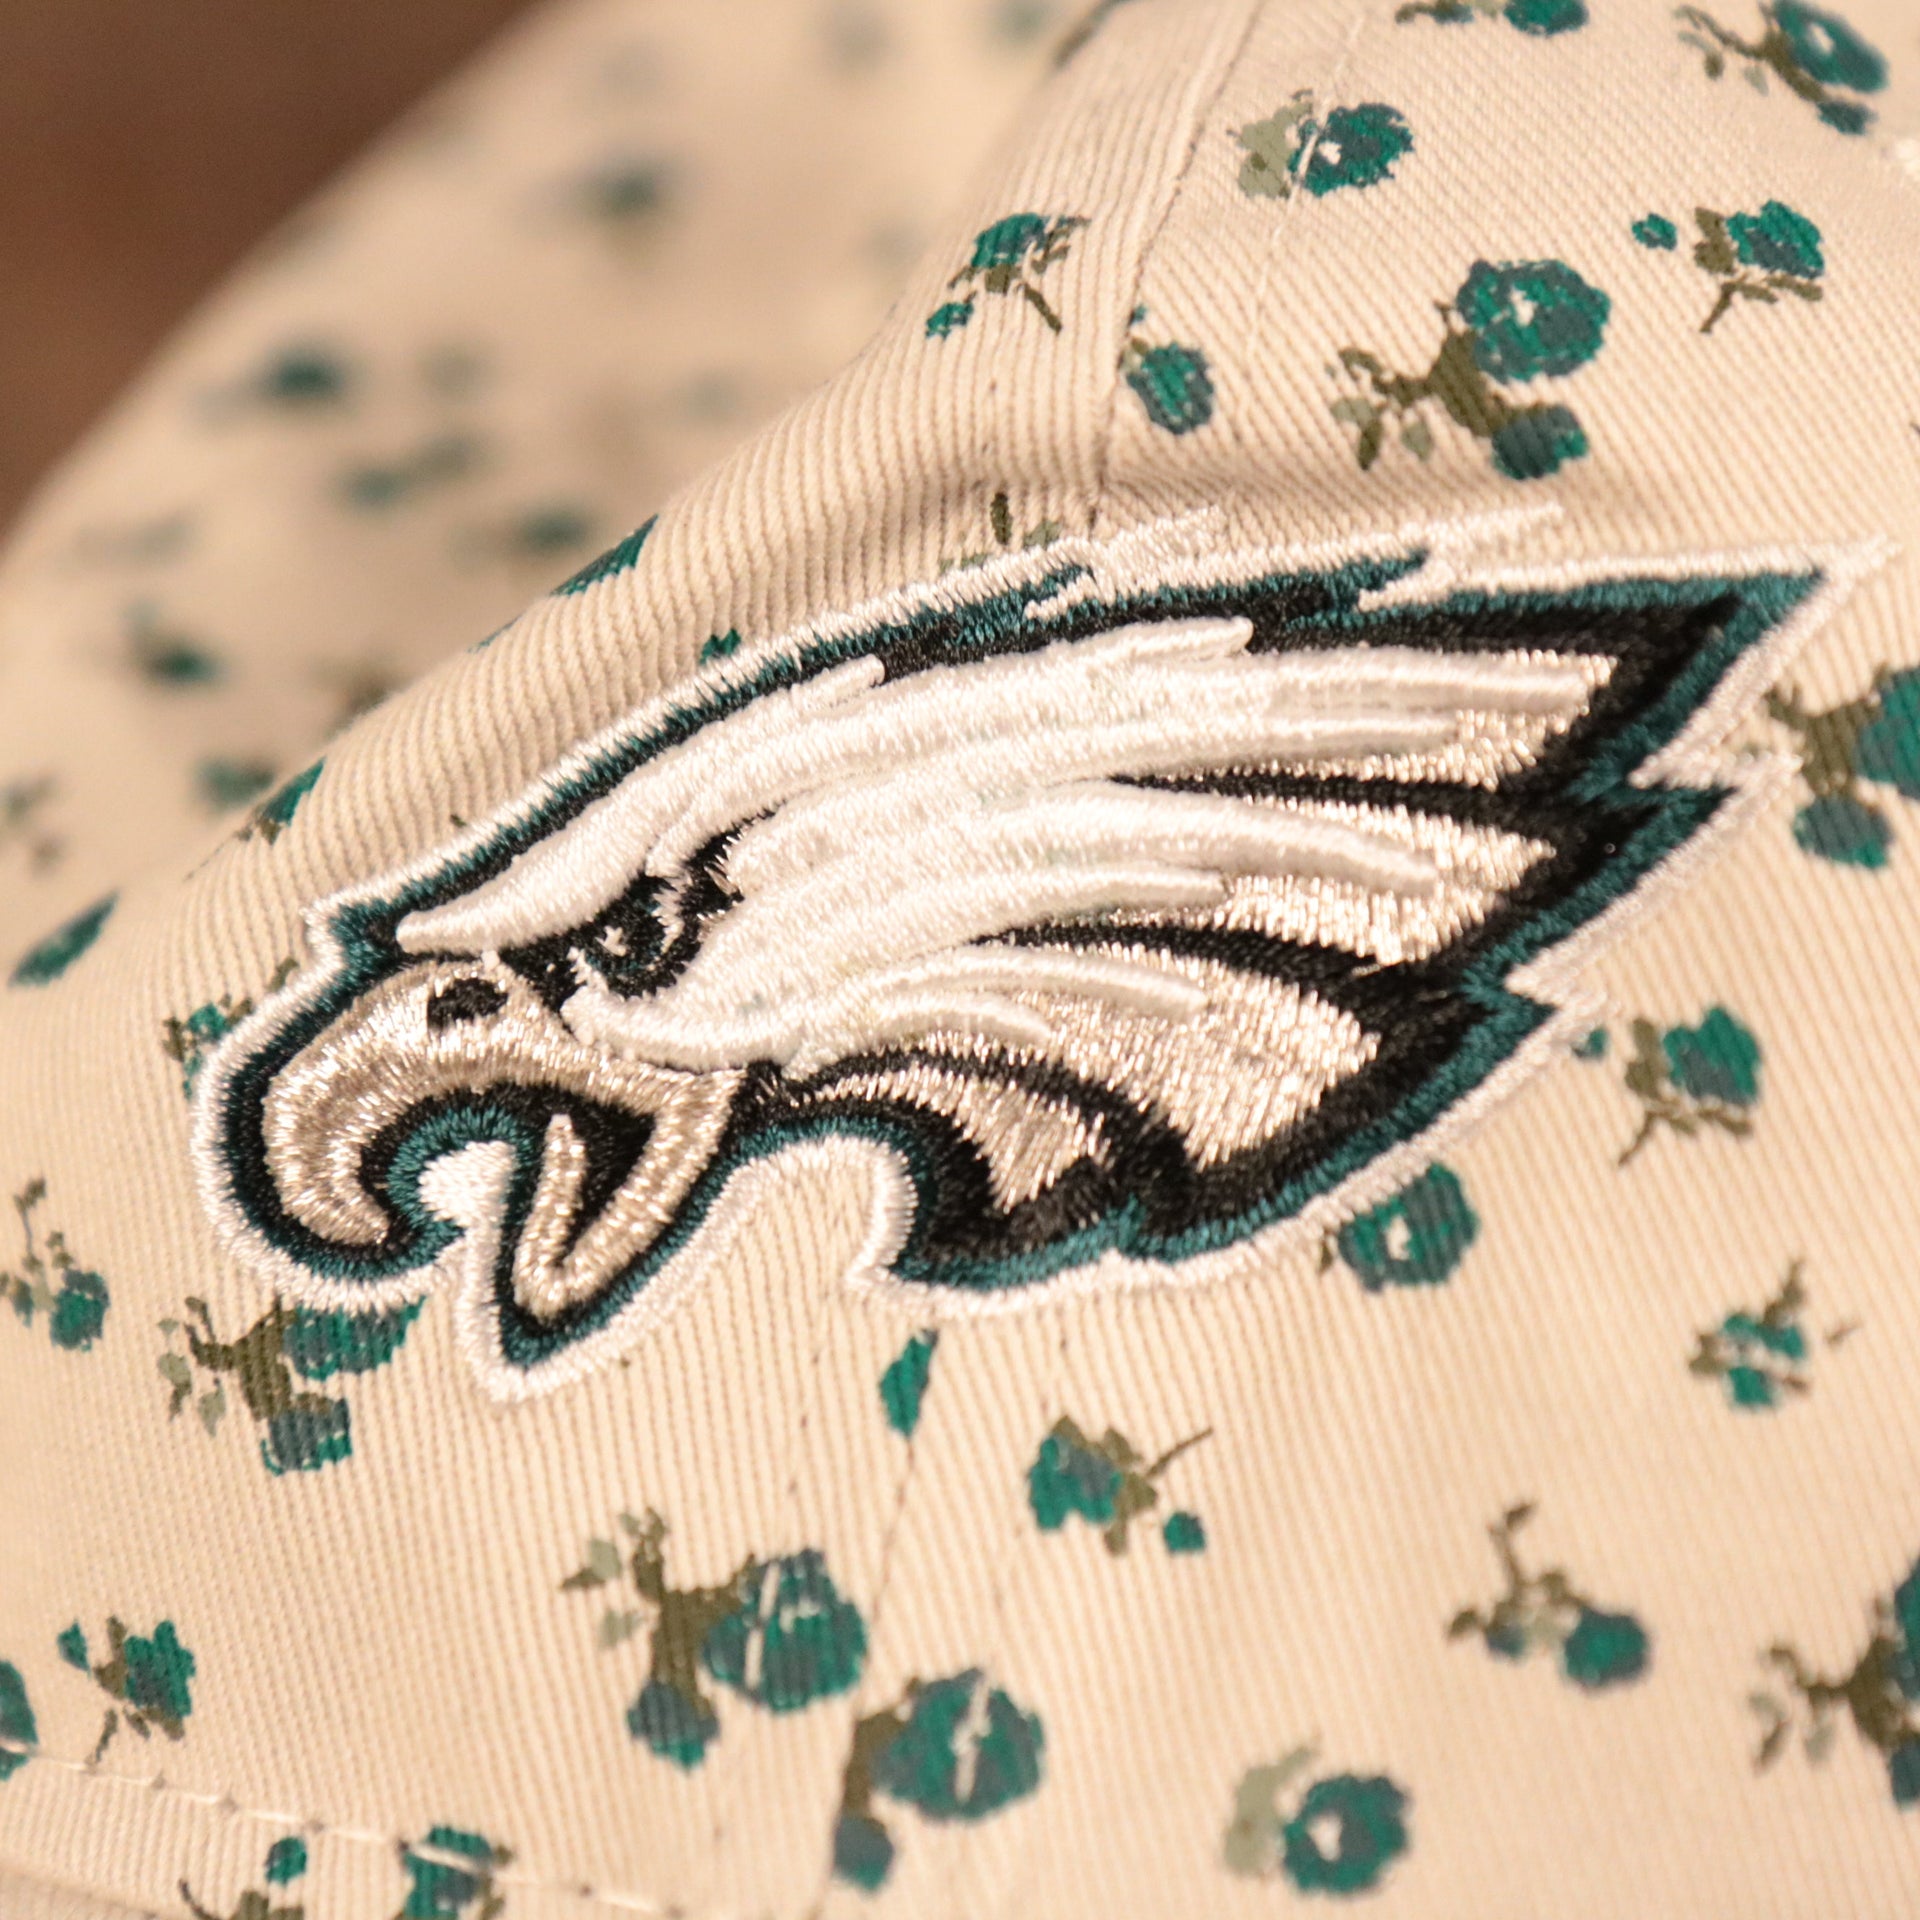 The Philadelphia Eagles logo on the front side of the cream youth micro floral hat.